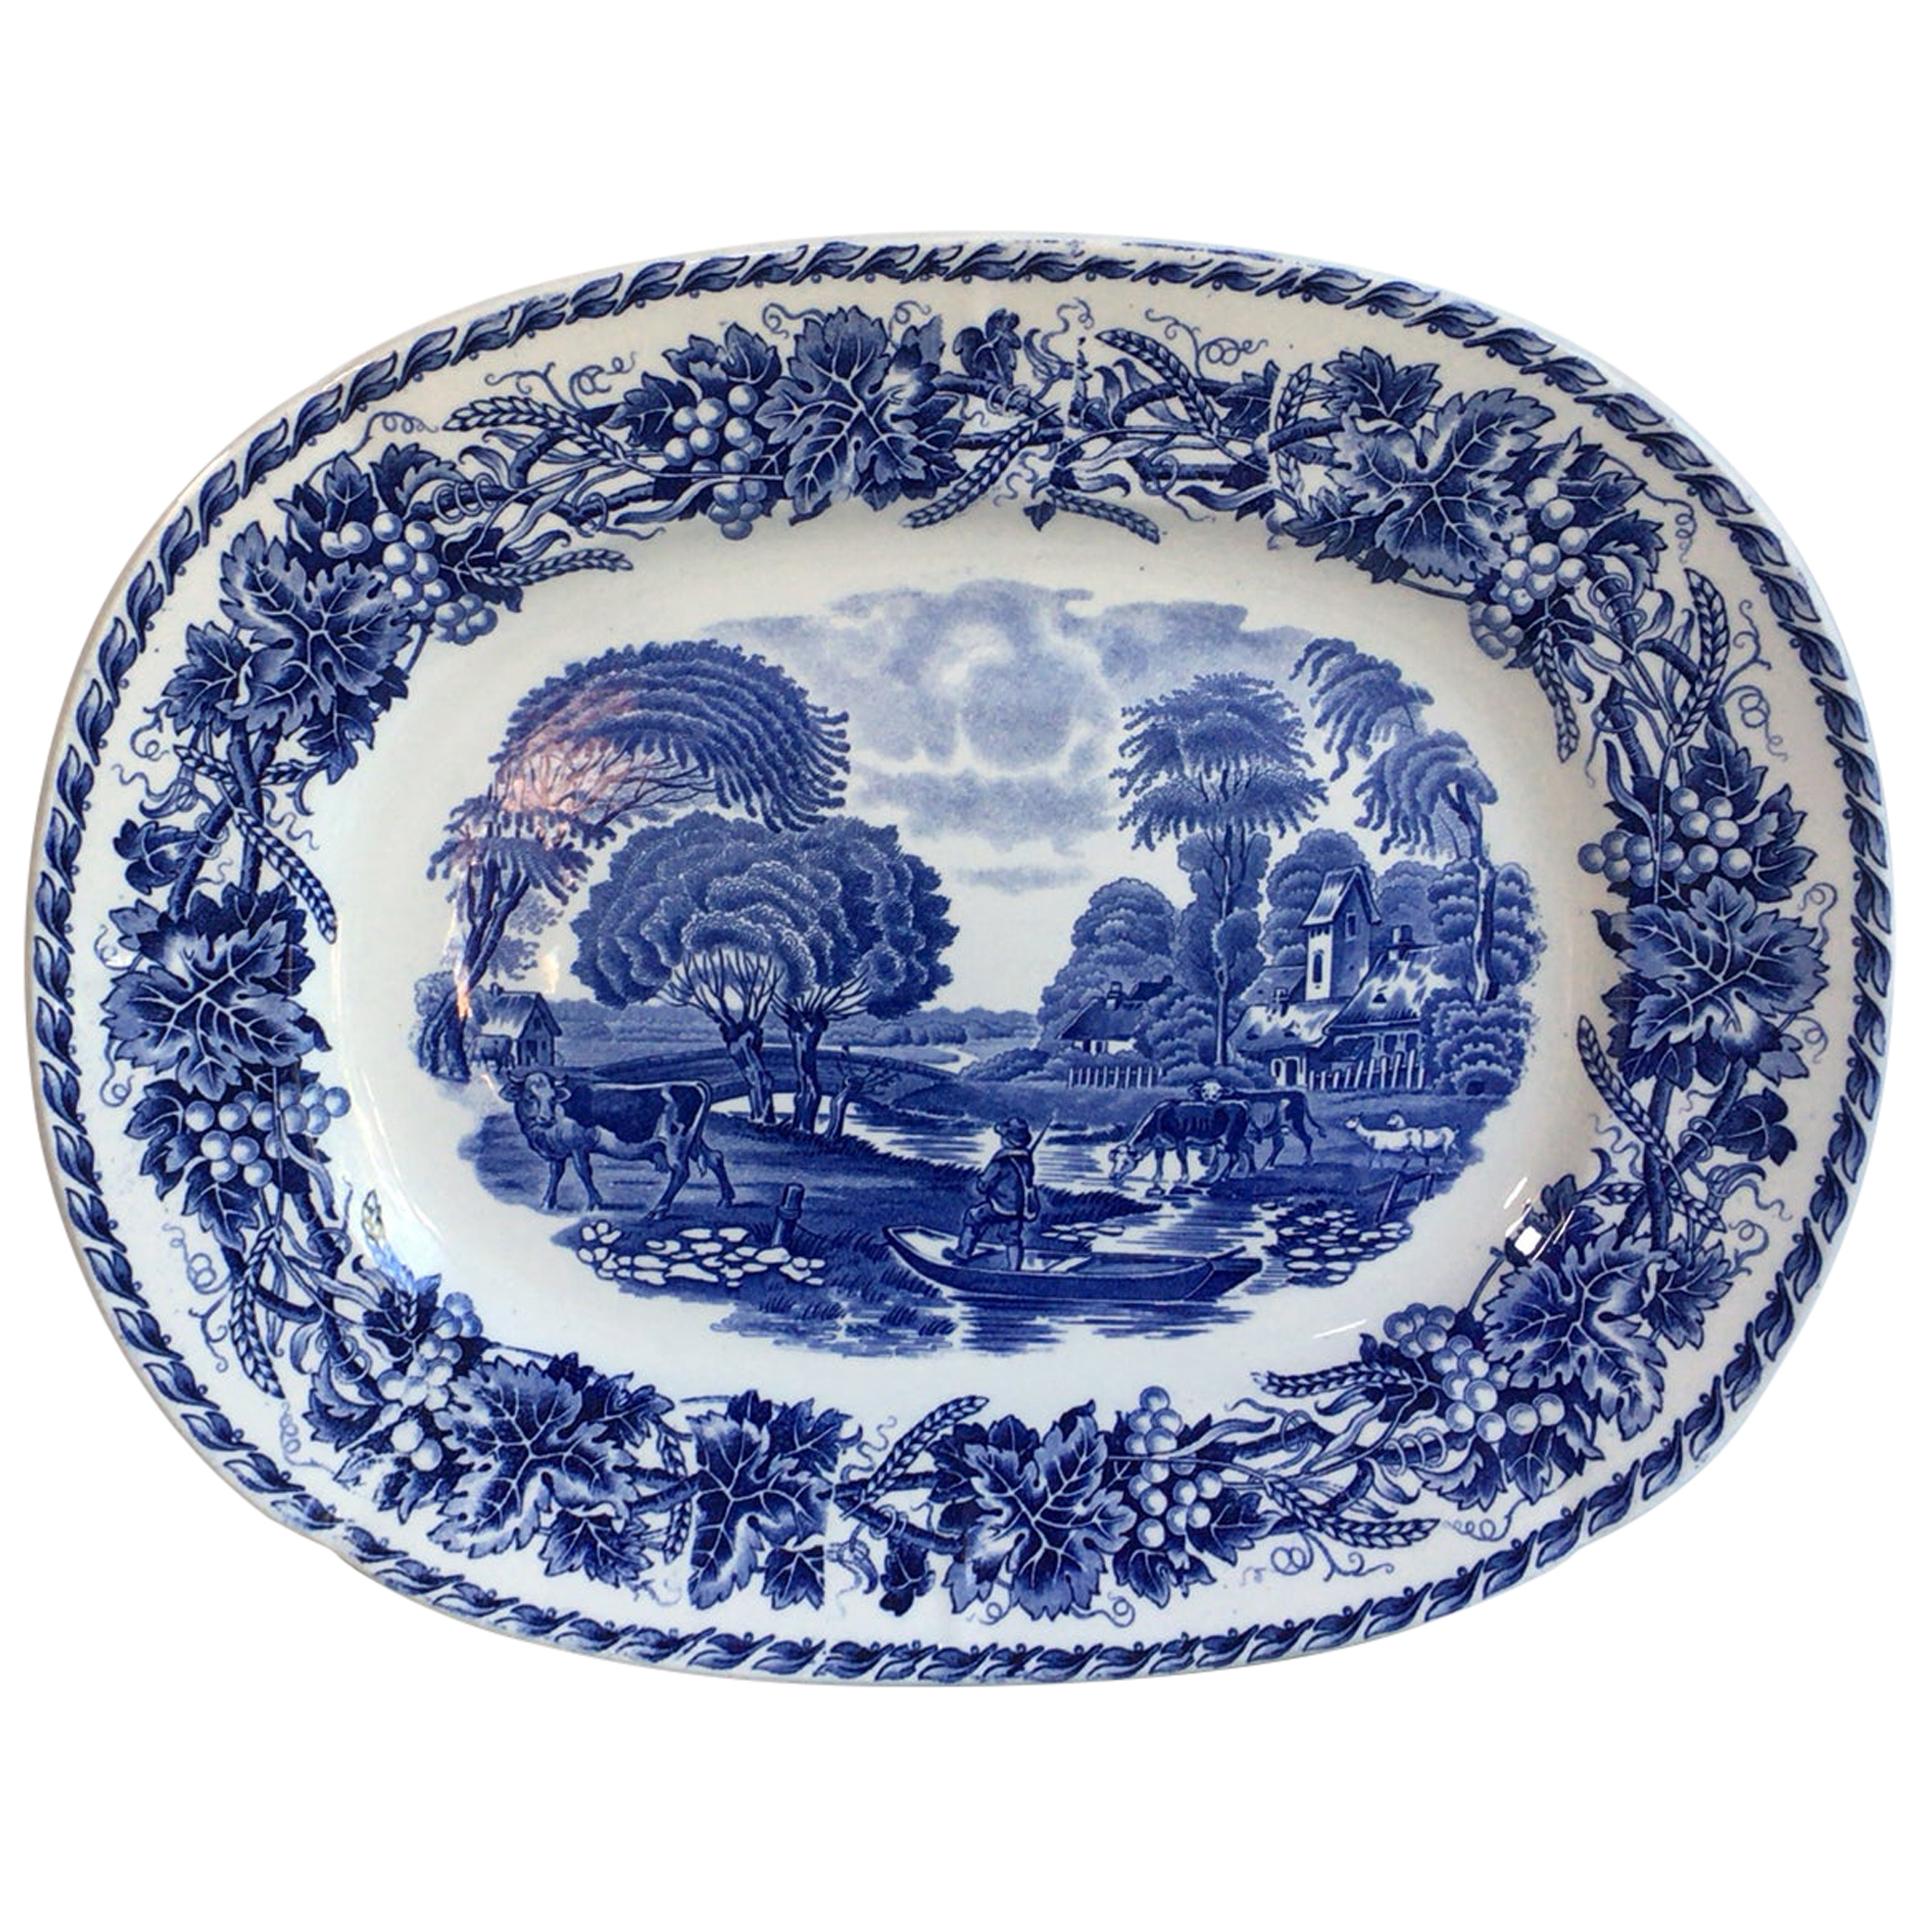 French 19th Century Large Blue and White Transferware Platter Sarreguemines